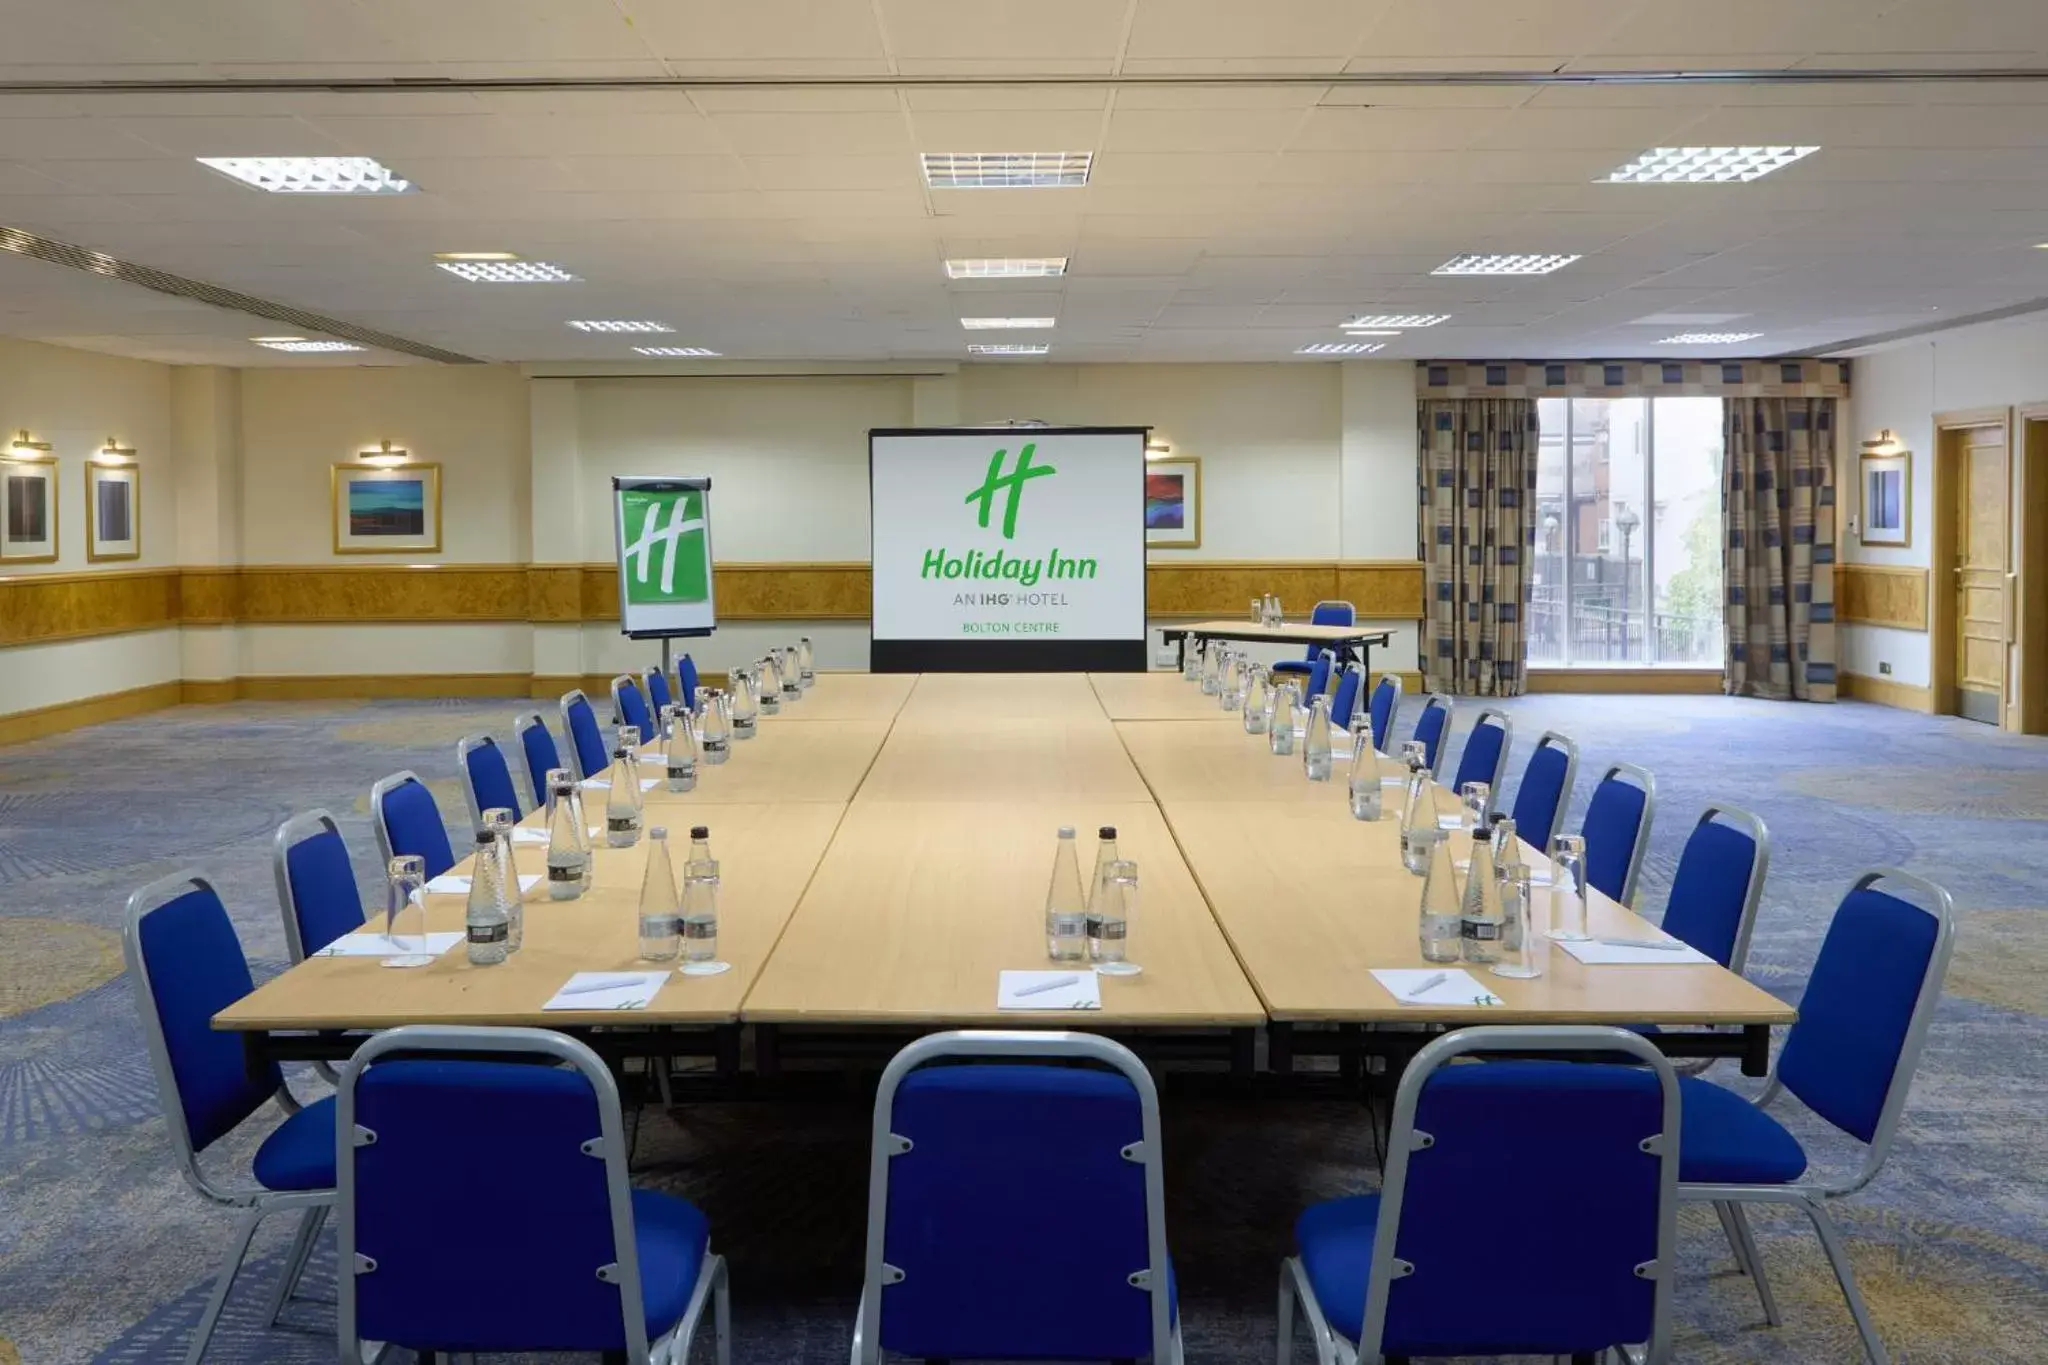 Meeting/conference room in Holiday Inn Bolton Centre, an IHG Hotel